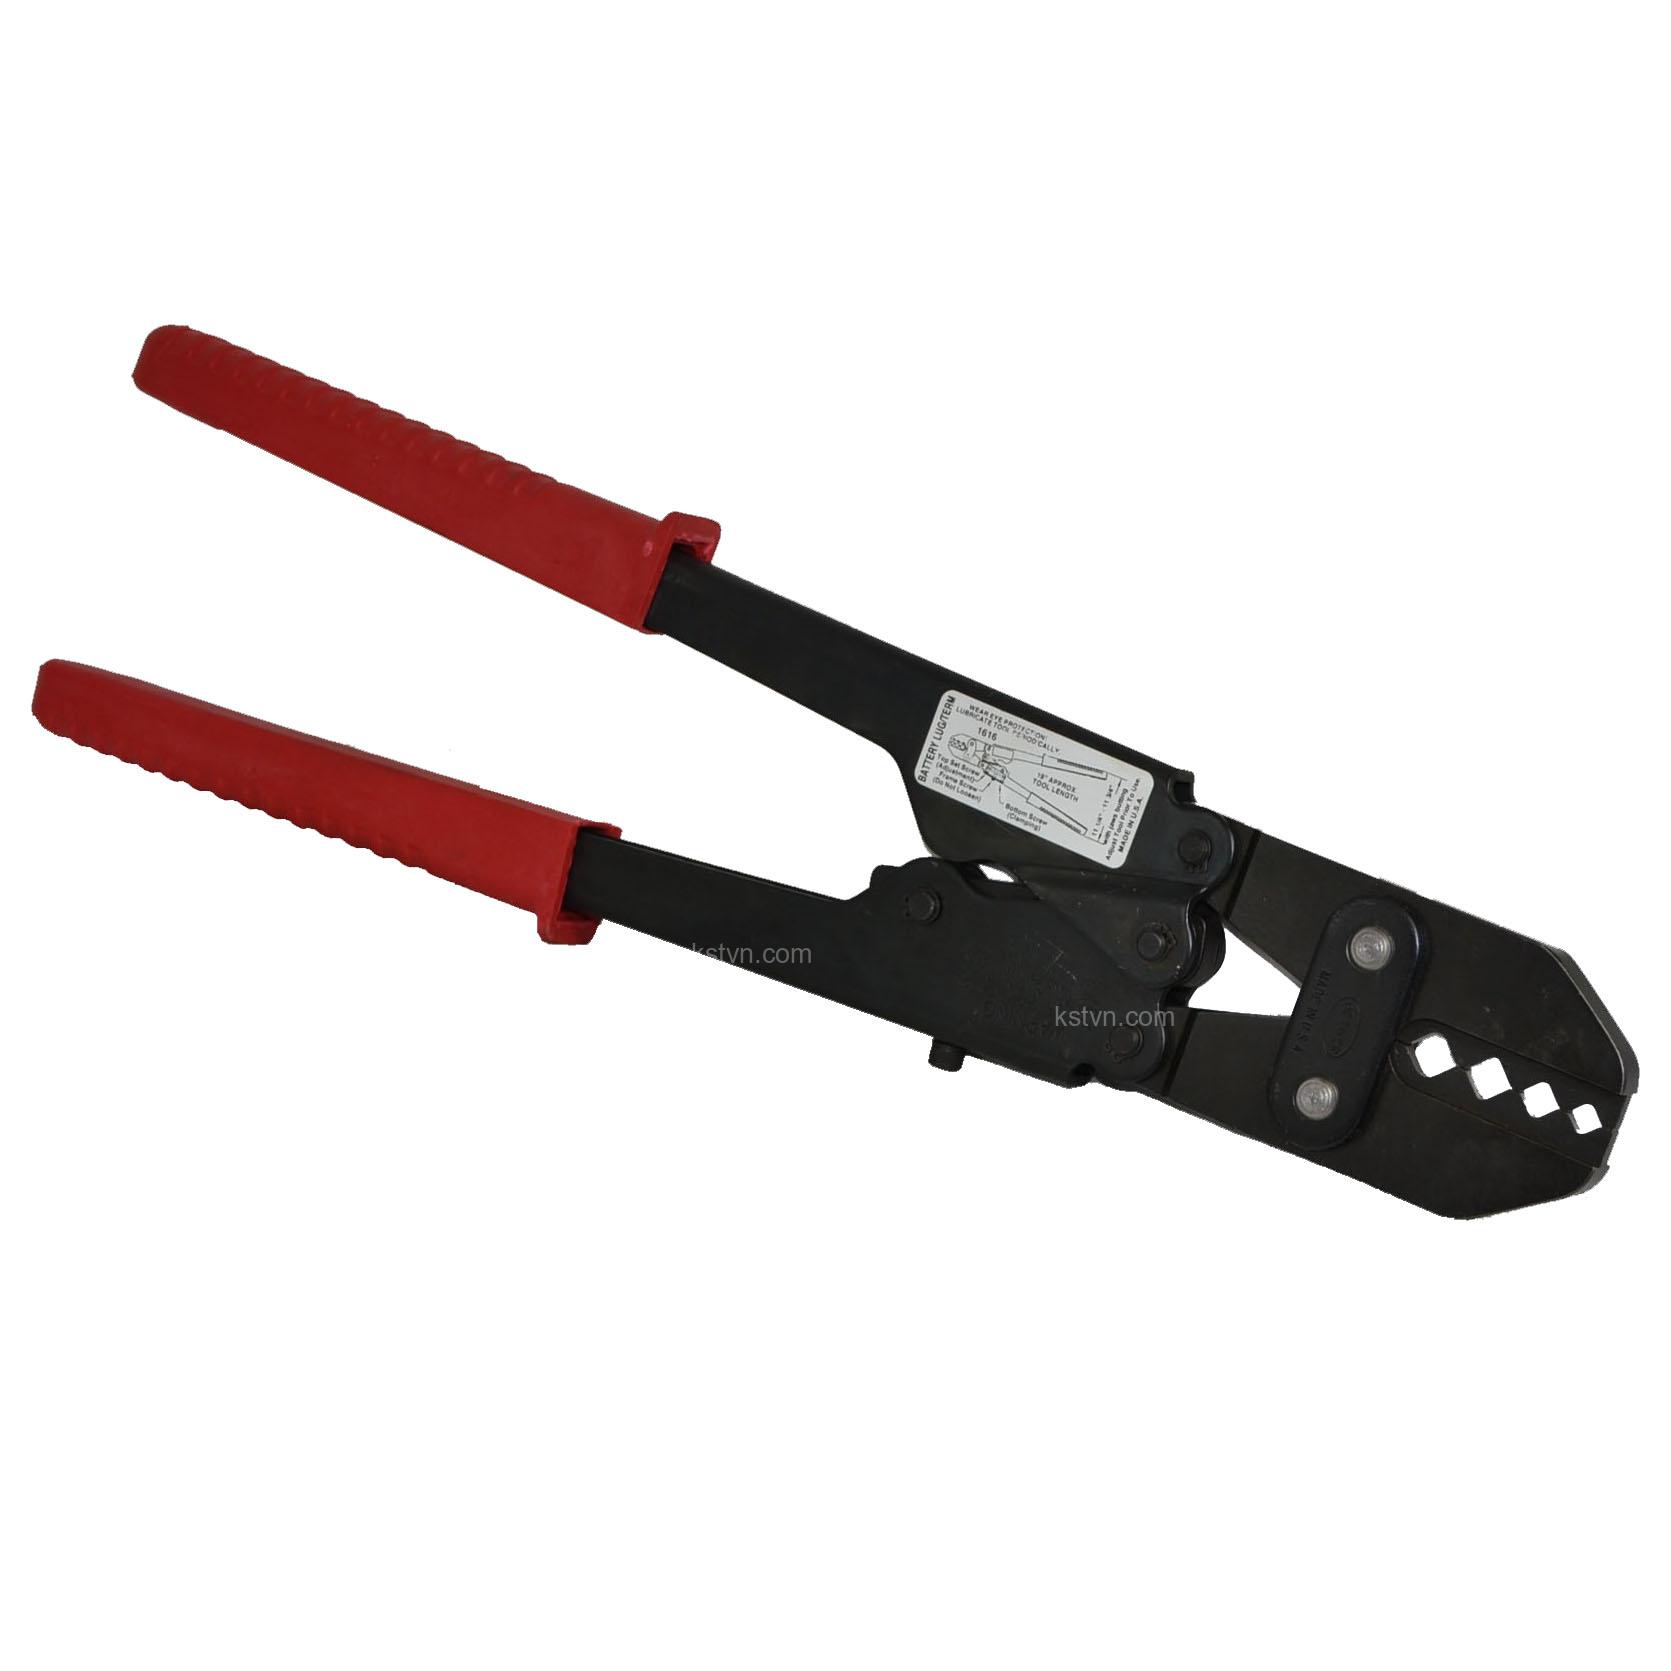 Essential tips to consider when purchasing a terminal lug crimper